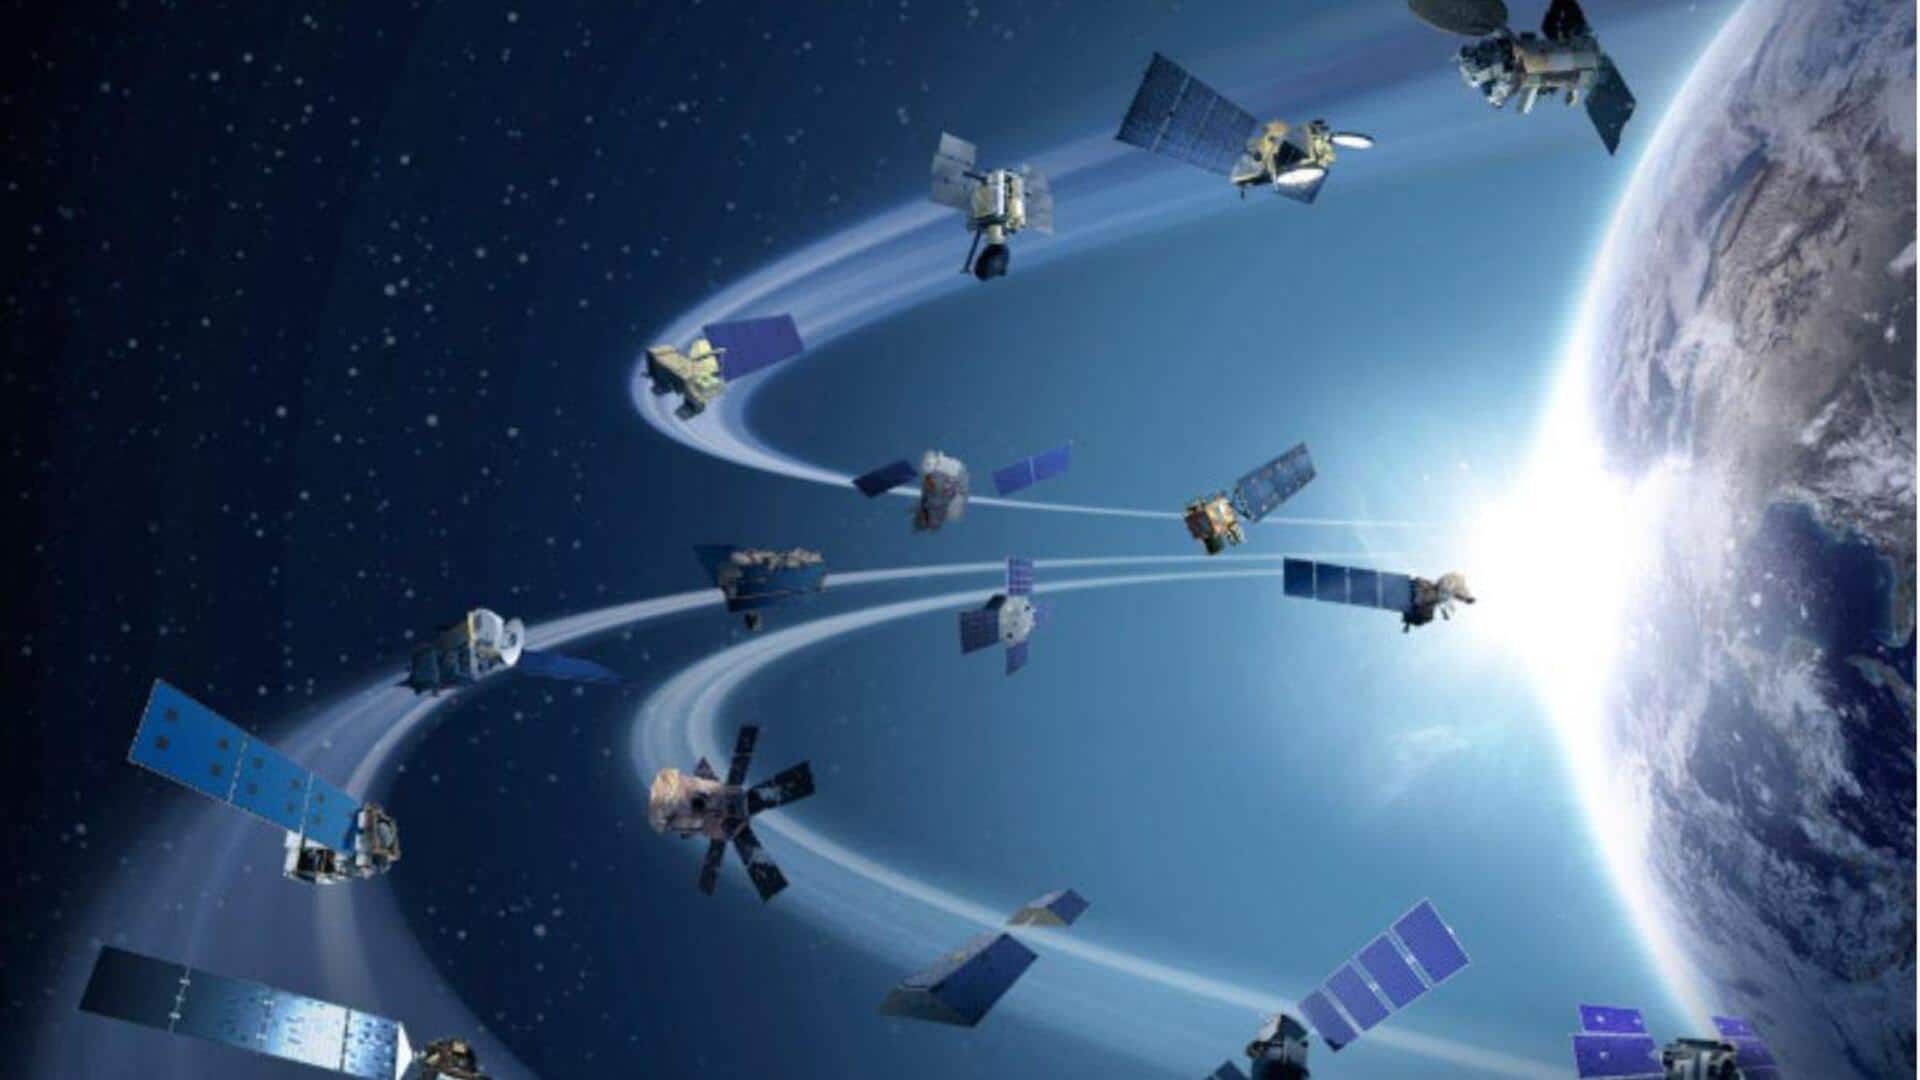 JioSpaceFiber, India's first satellite-based gigabit broadband service launched